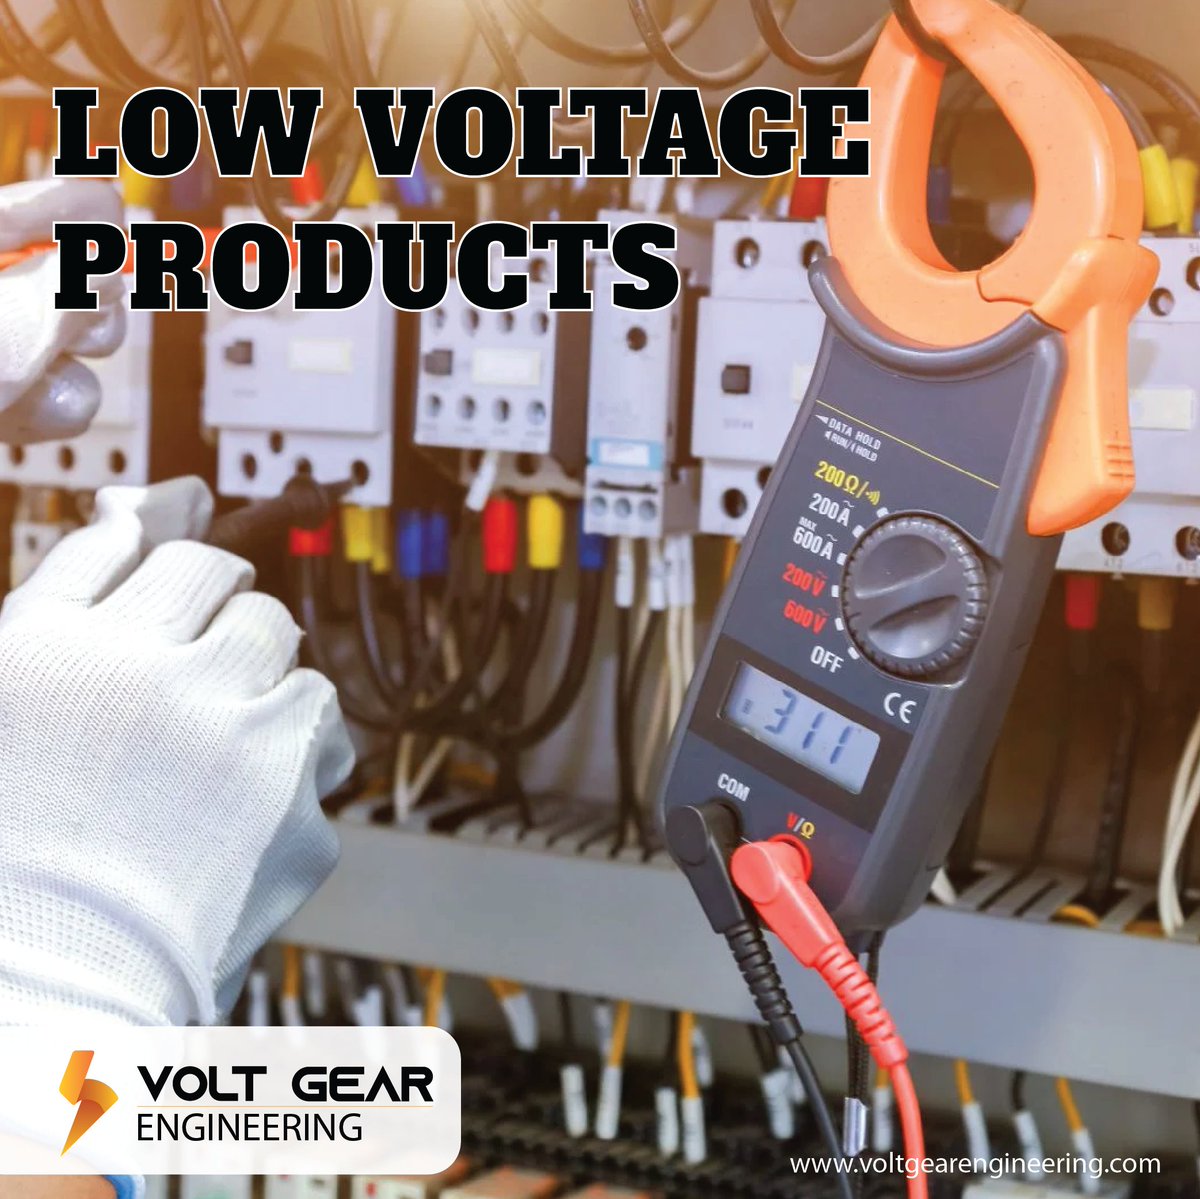 Empower your world with our state-of-the-art low voltage products. With cutting-edge technology and superior efficiency, we're redefining what's possible in the realm of power solutions. 
.
.
#lowvoltageproducts #voltgearengineering #EfficiencyUnleashed